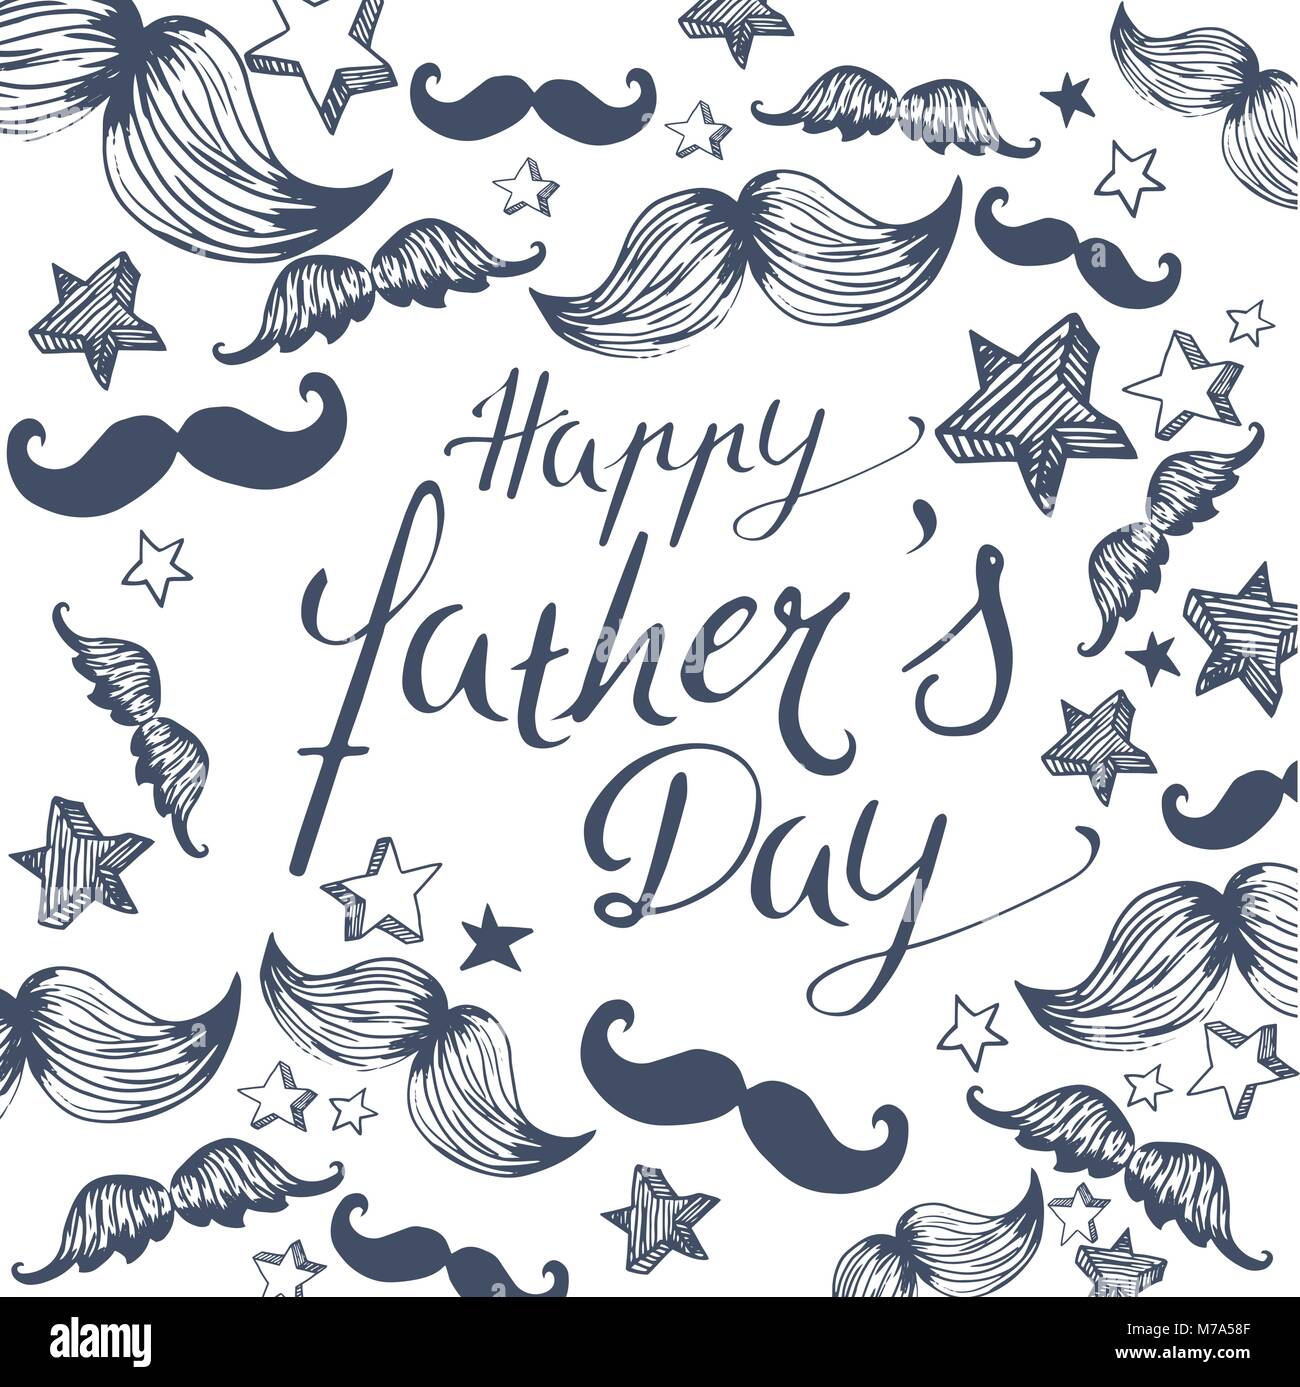 Happy Father's Day full vector elements background Stock Vector